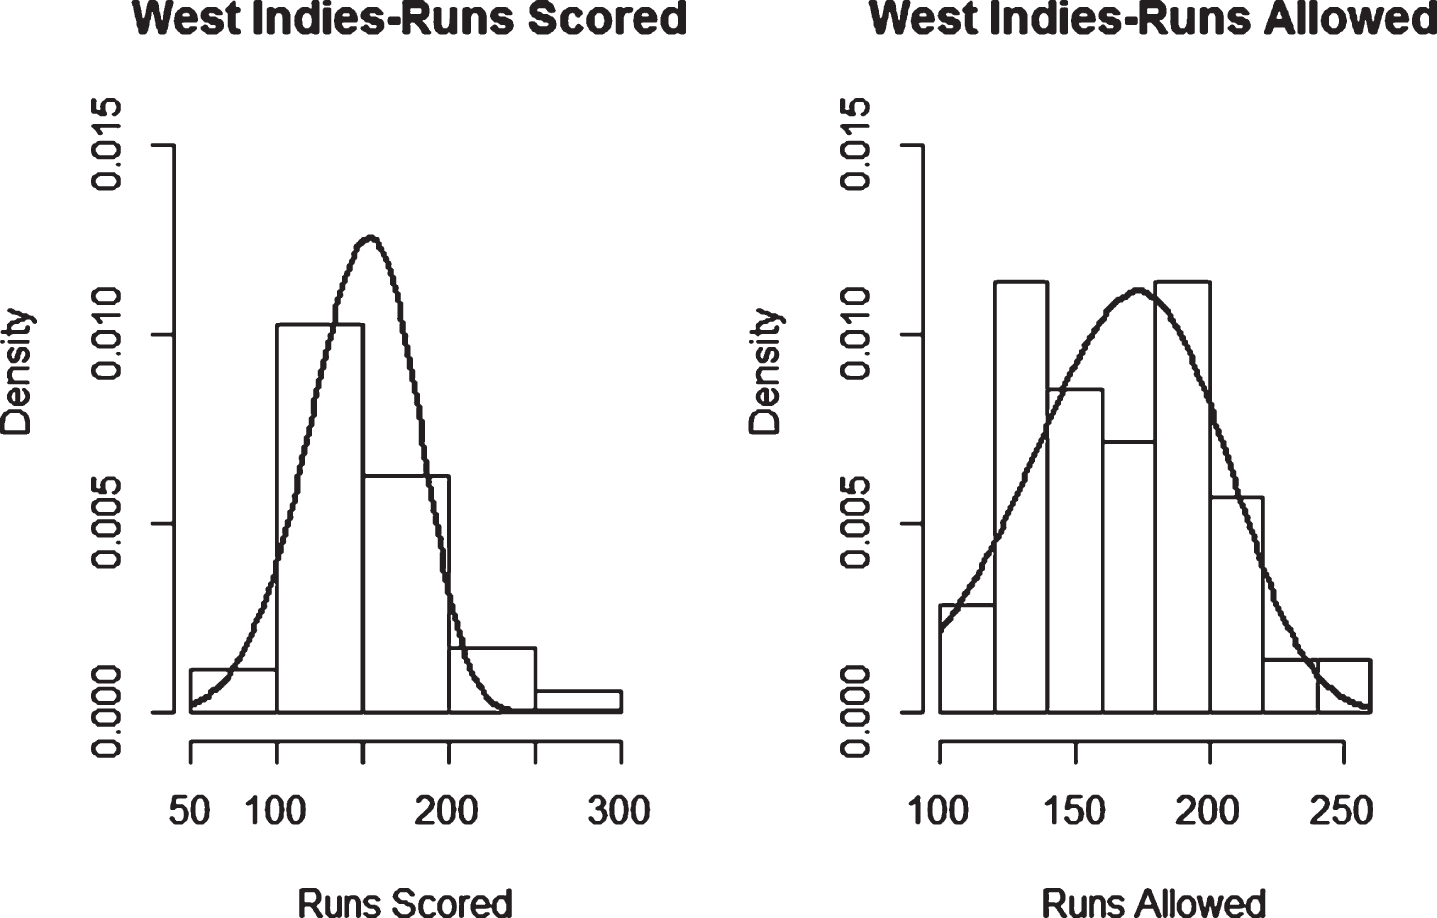 Weibull Distribution Fit for Runs Scored and Runs Allowed for West Indies using Least Squares Method (Twenty20).